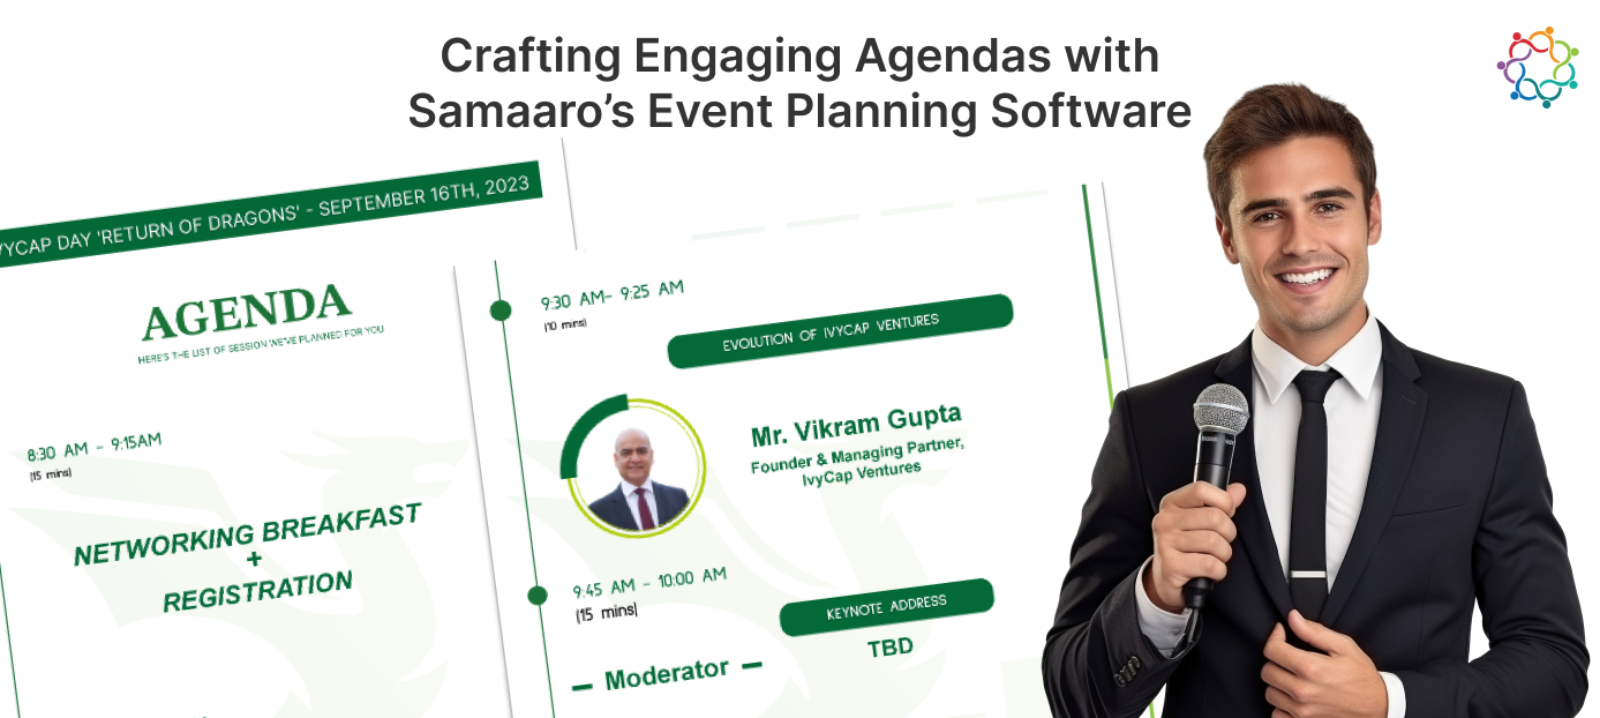 Crafting Engaging Agendas with Samaaro’s Event Planning Software